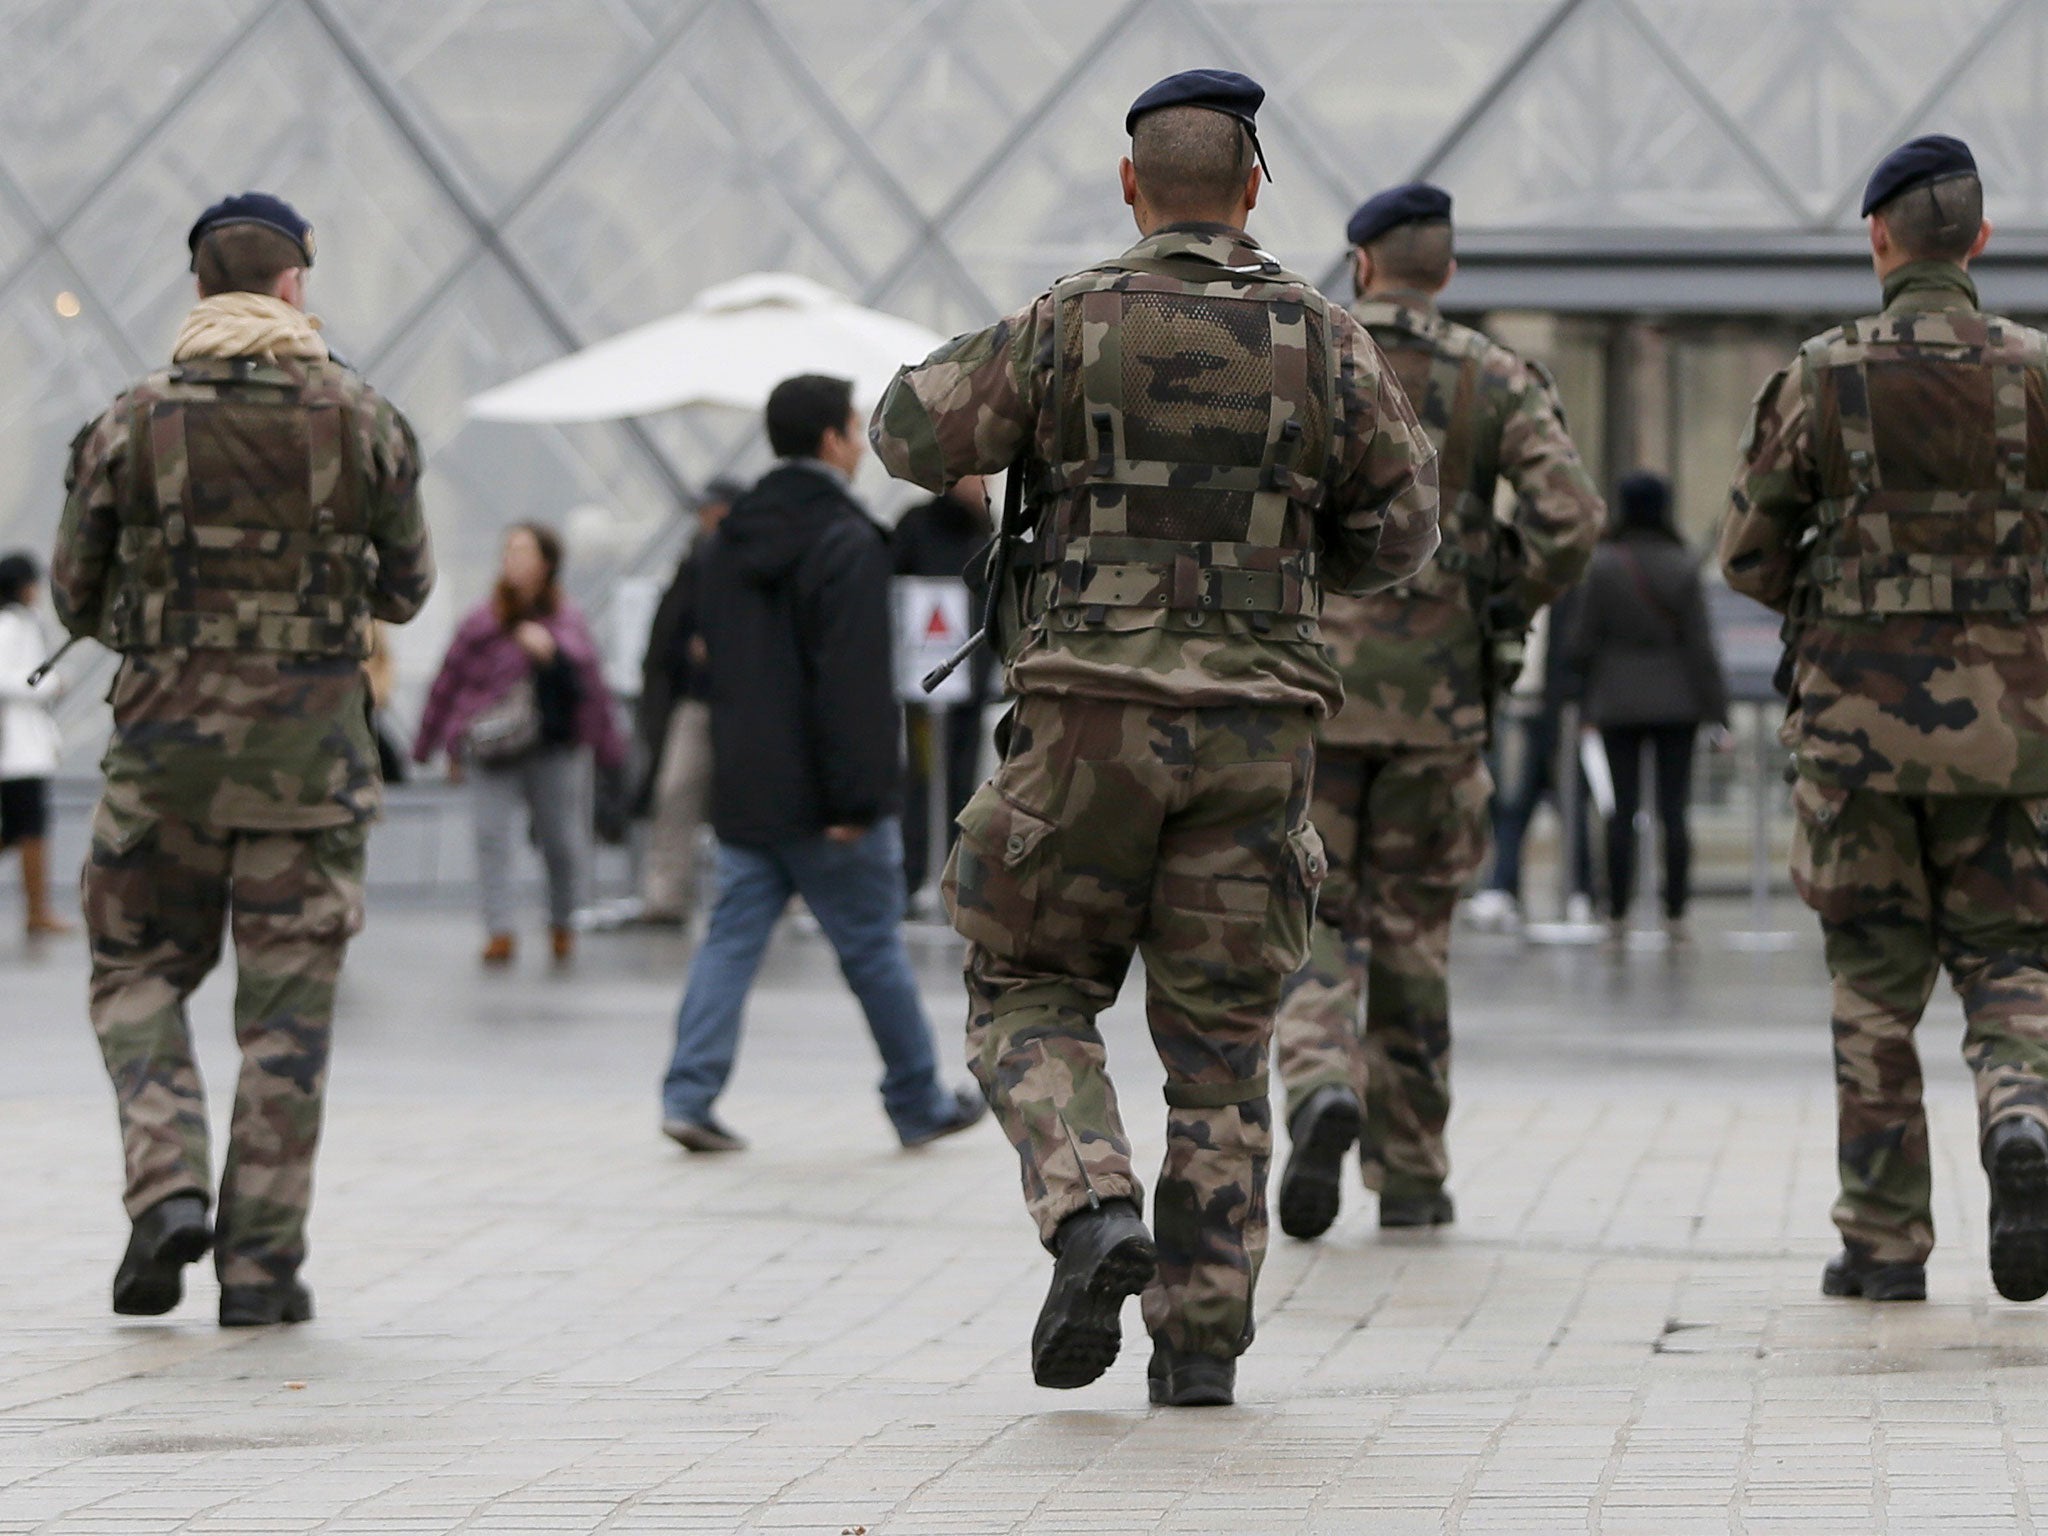 Troops patrol in Paris the day after the terror attack at Charlie hebdo's offices